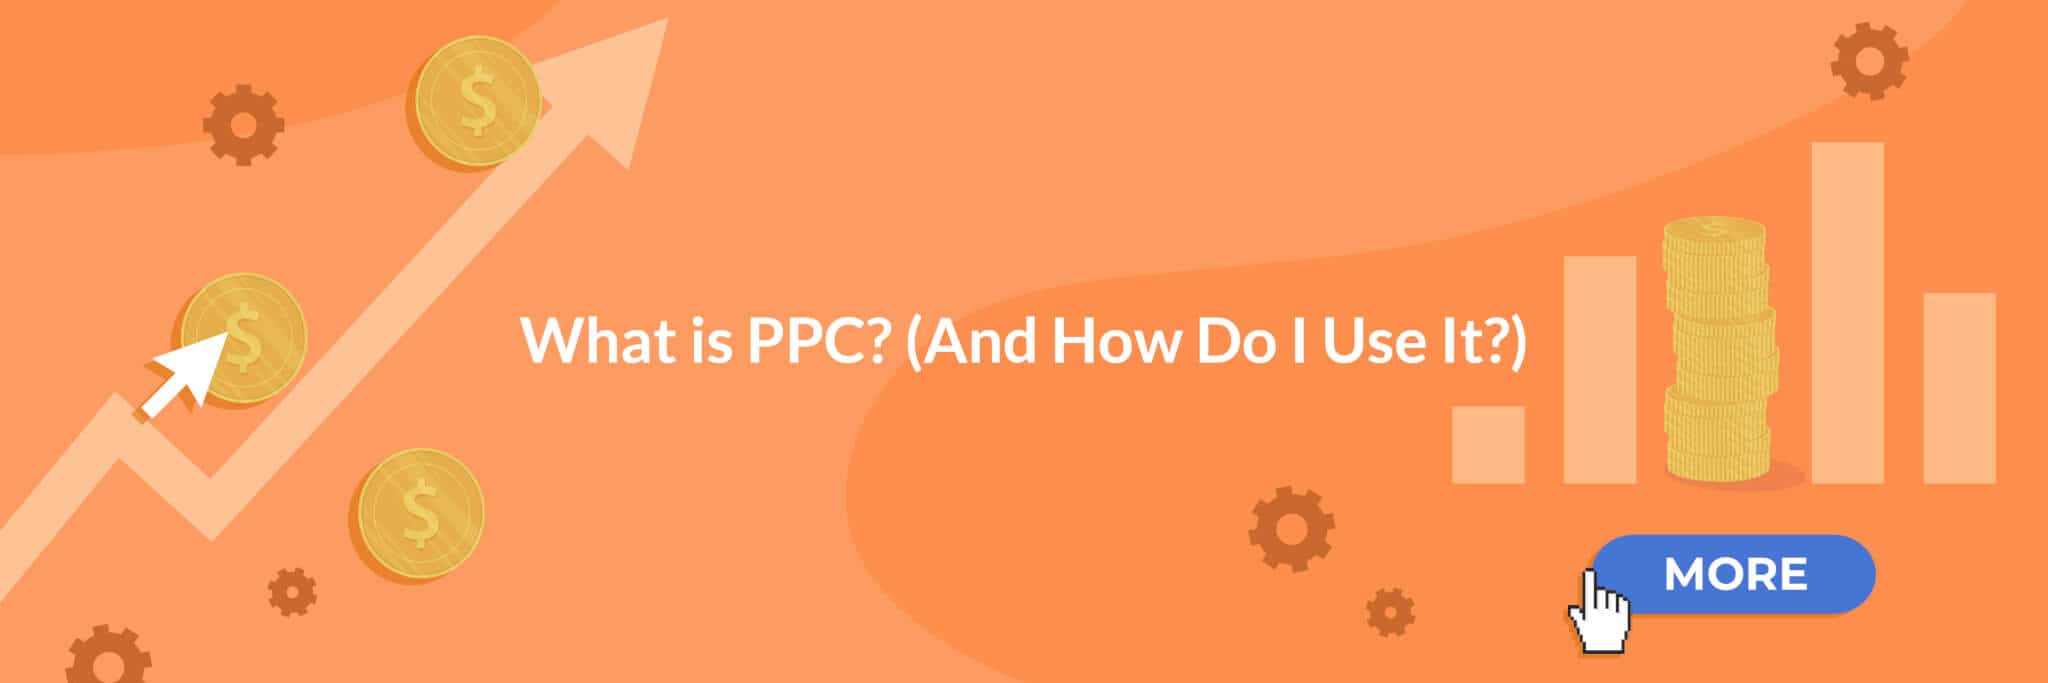 What is PPC? (And How Do I Use It?)